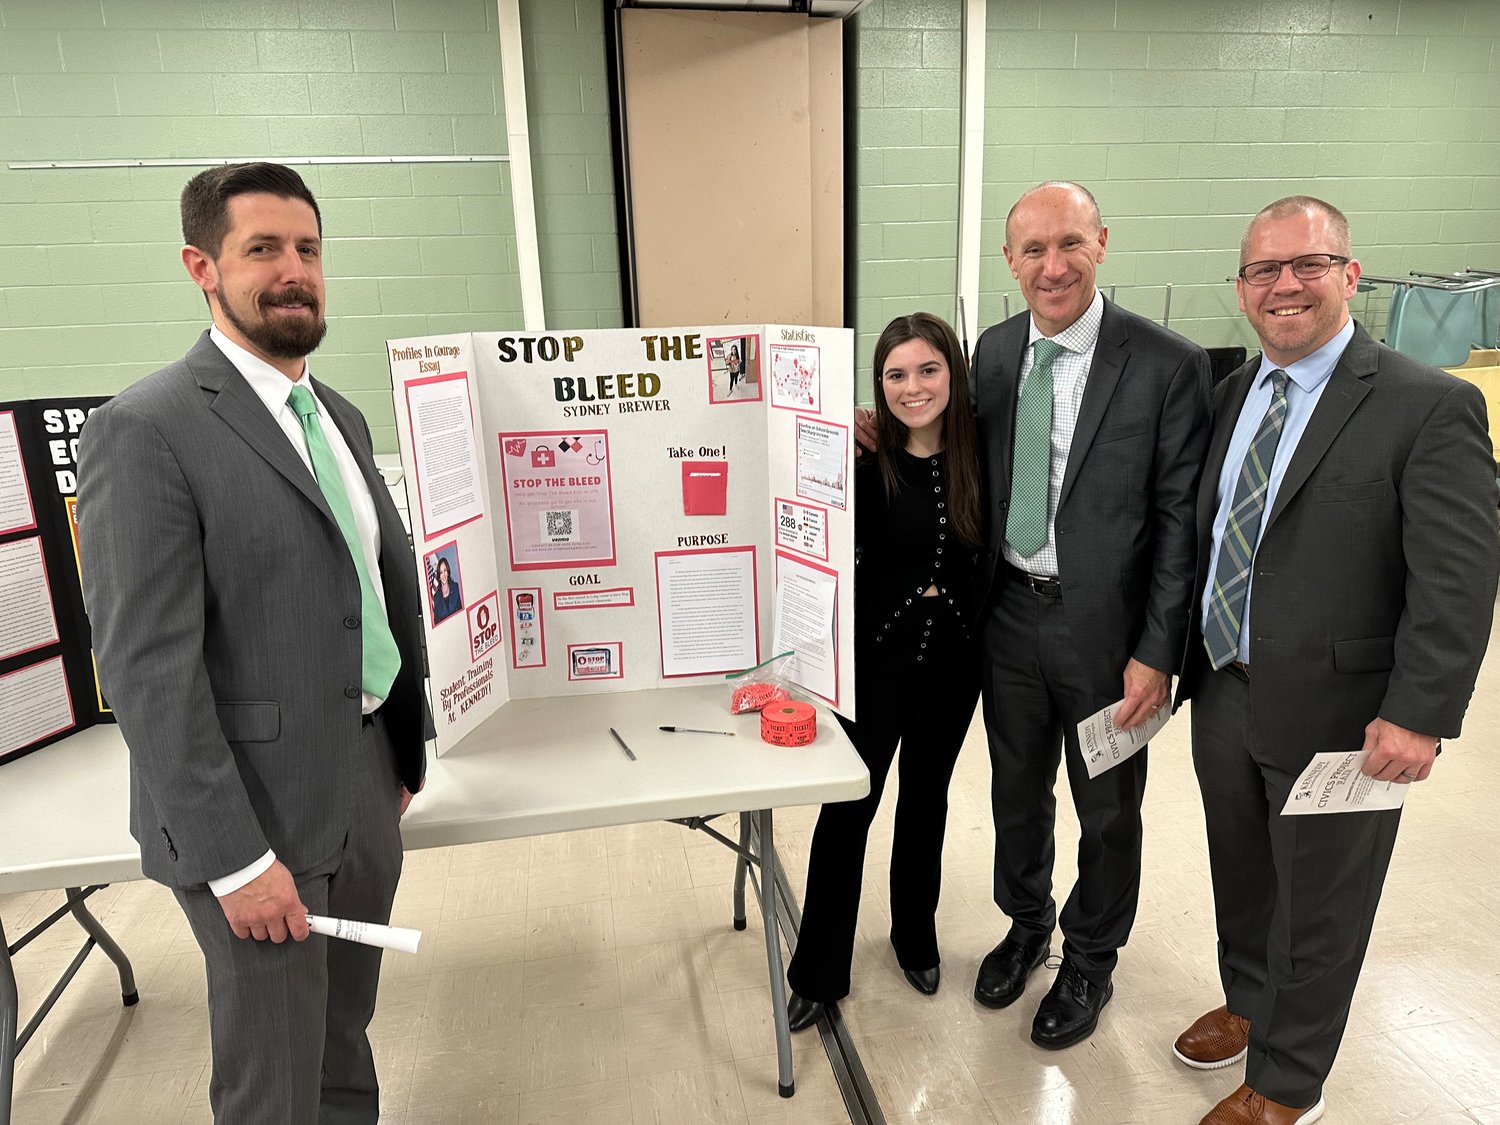 Sydney Brewer with, from left, Kennedy High Assistant Principal Daniel Jantzen, Principal Gerard Owenburg and Assistant Principal Jeff Cronk at the school’s civics fair, where Brewer presented her ‘Stop the Bleed’ project idea.